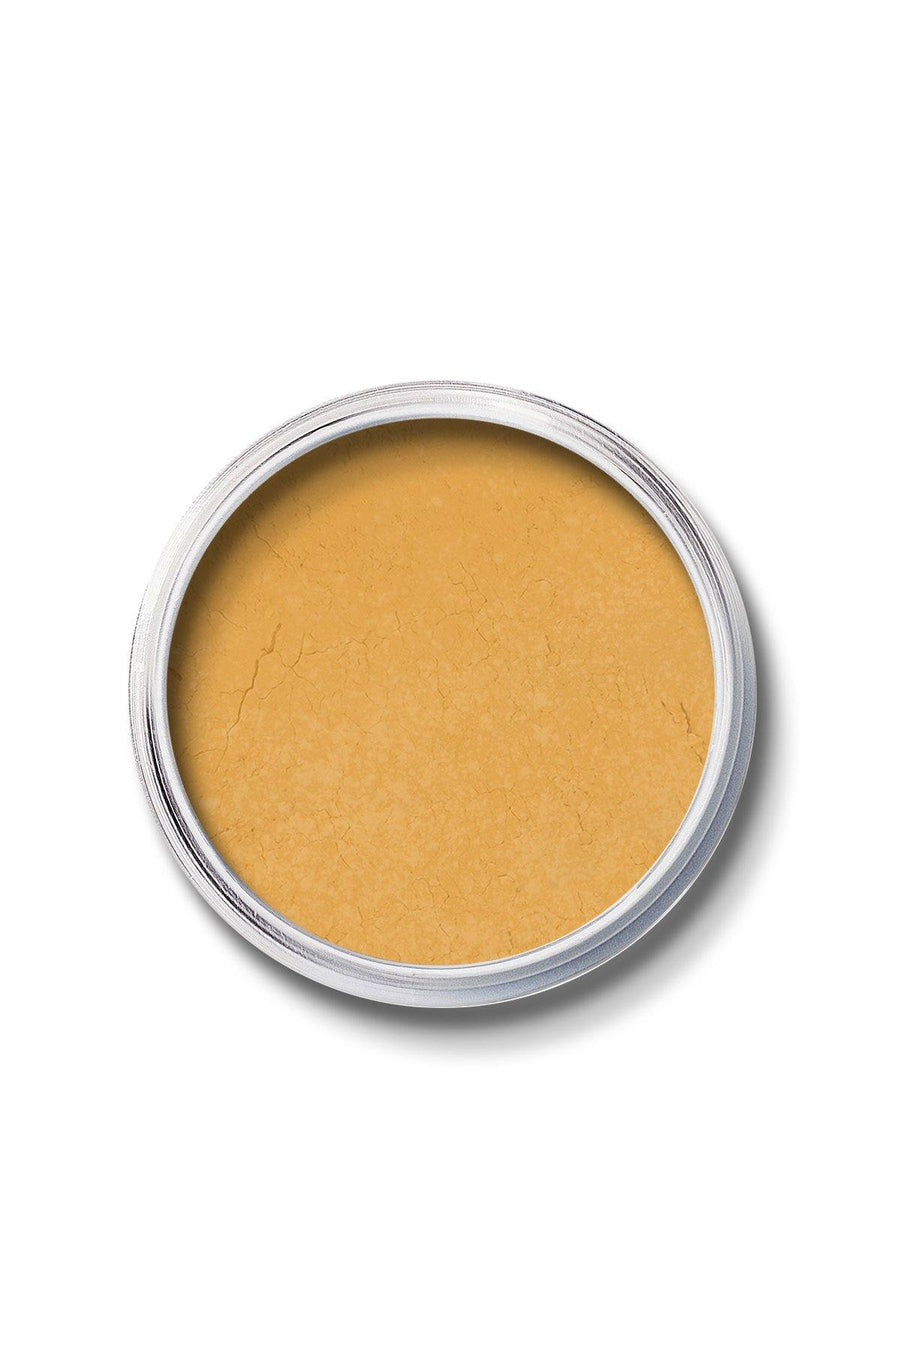 Mineral SPF 15 Foundation #11 - Gold - Blend Mineral Cosmetics